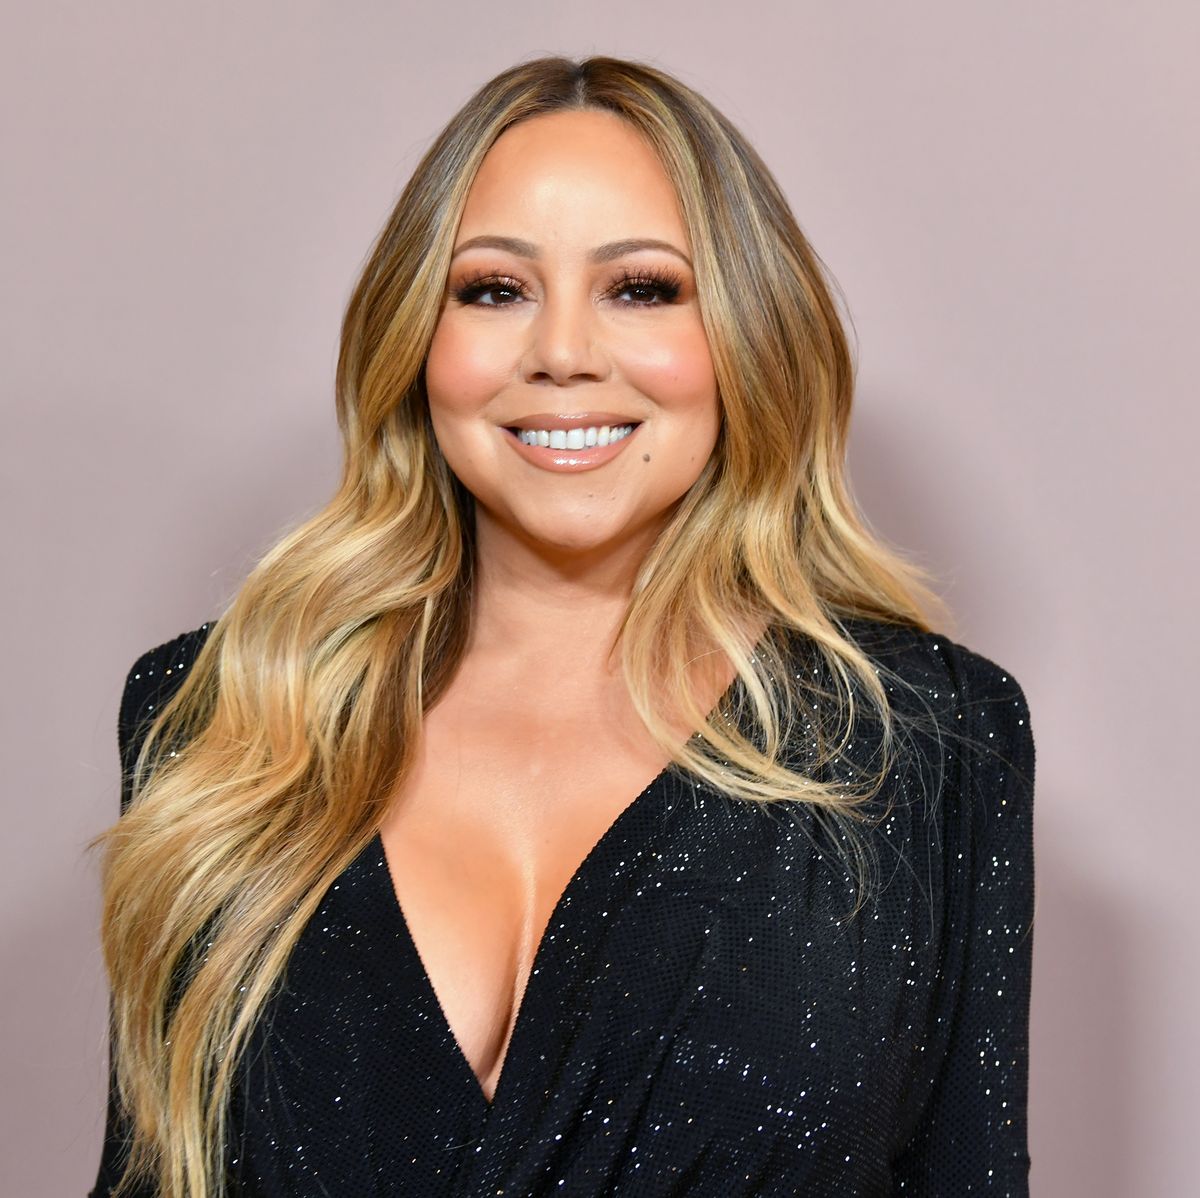 https://hips.hearstapps.com/hmg-prod/images/gettyimages-1180475233-mariahcarey-1574092499.jpg?crop=0.649xw:0.963xh;0.164xw,0.0366xh&resize=1200:*